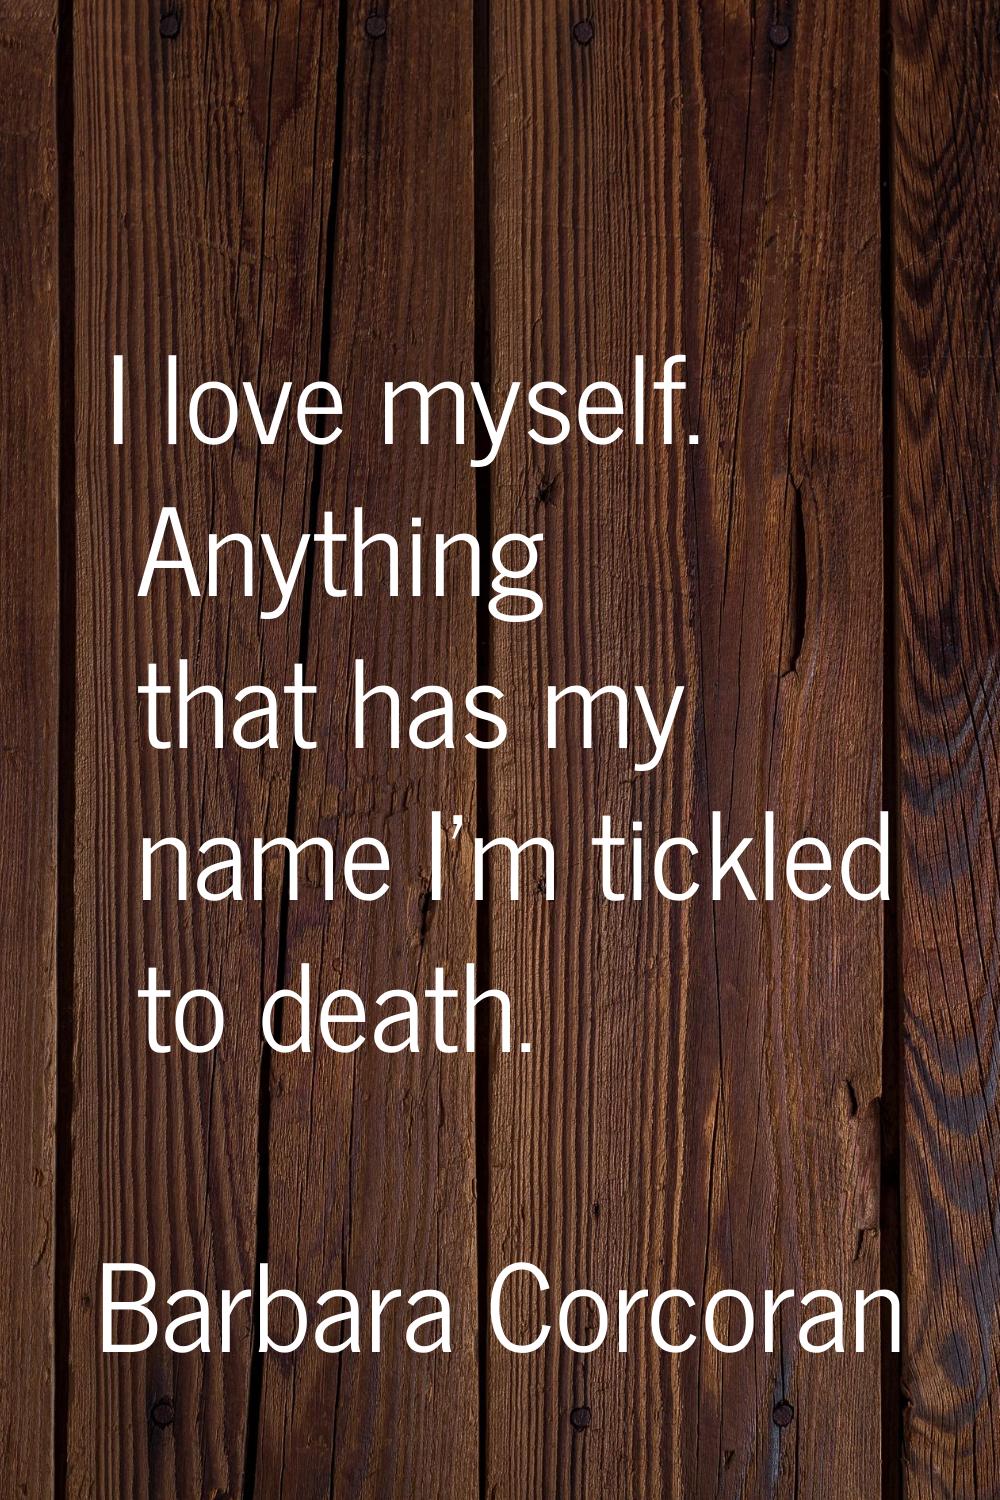 I love myself. Anything that has my name I'm tickled to death.